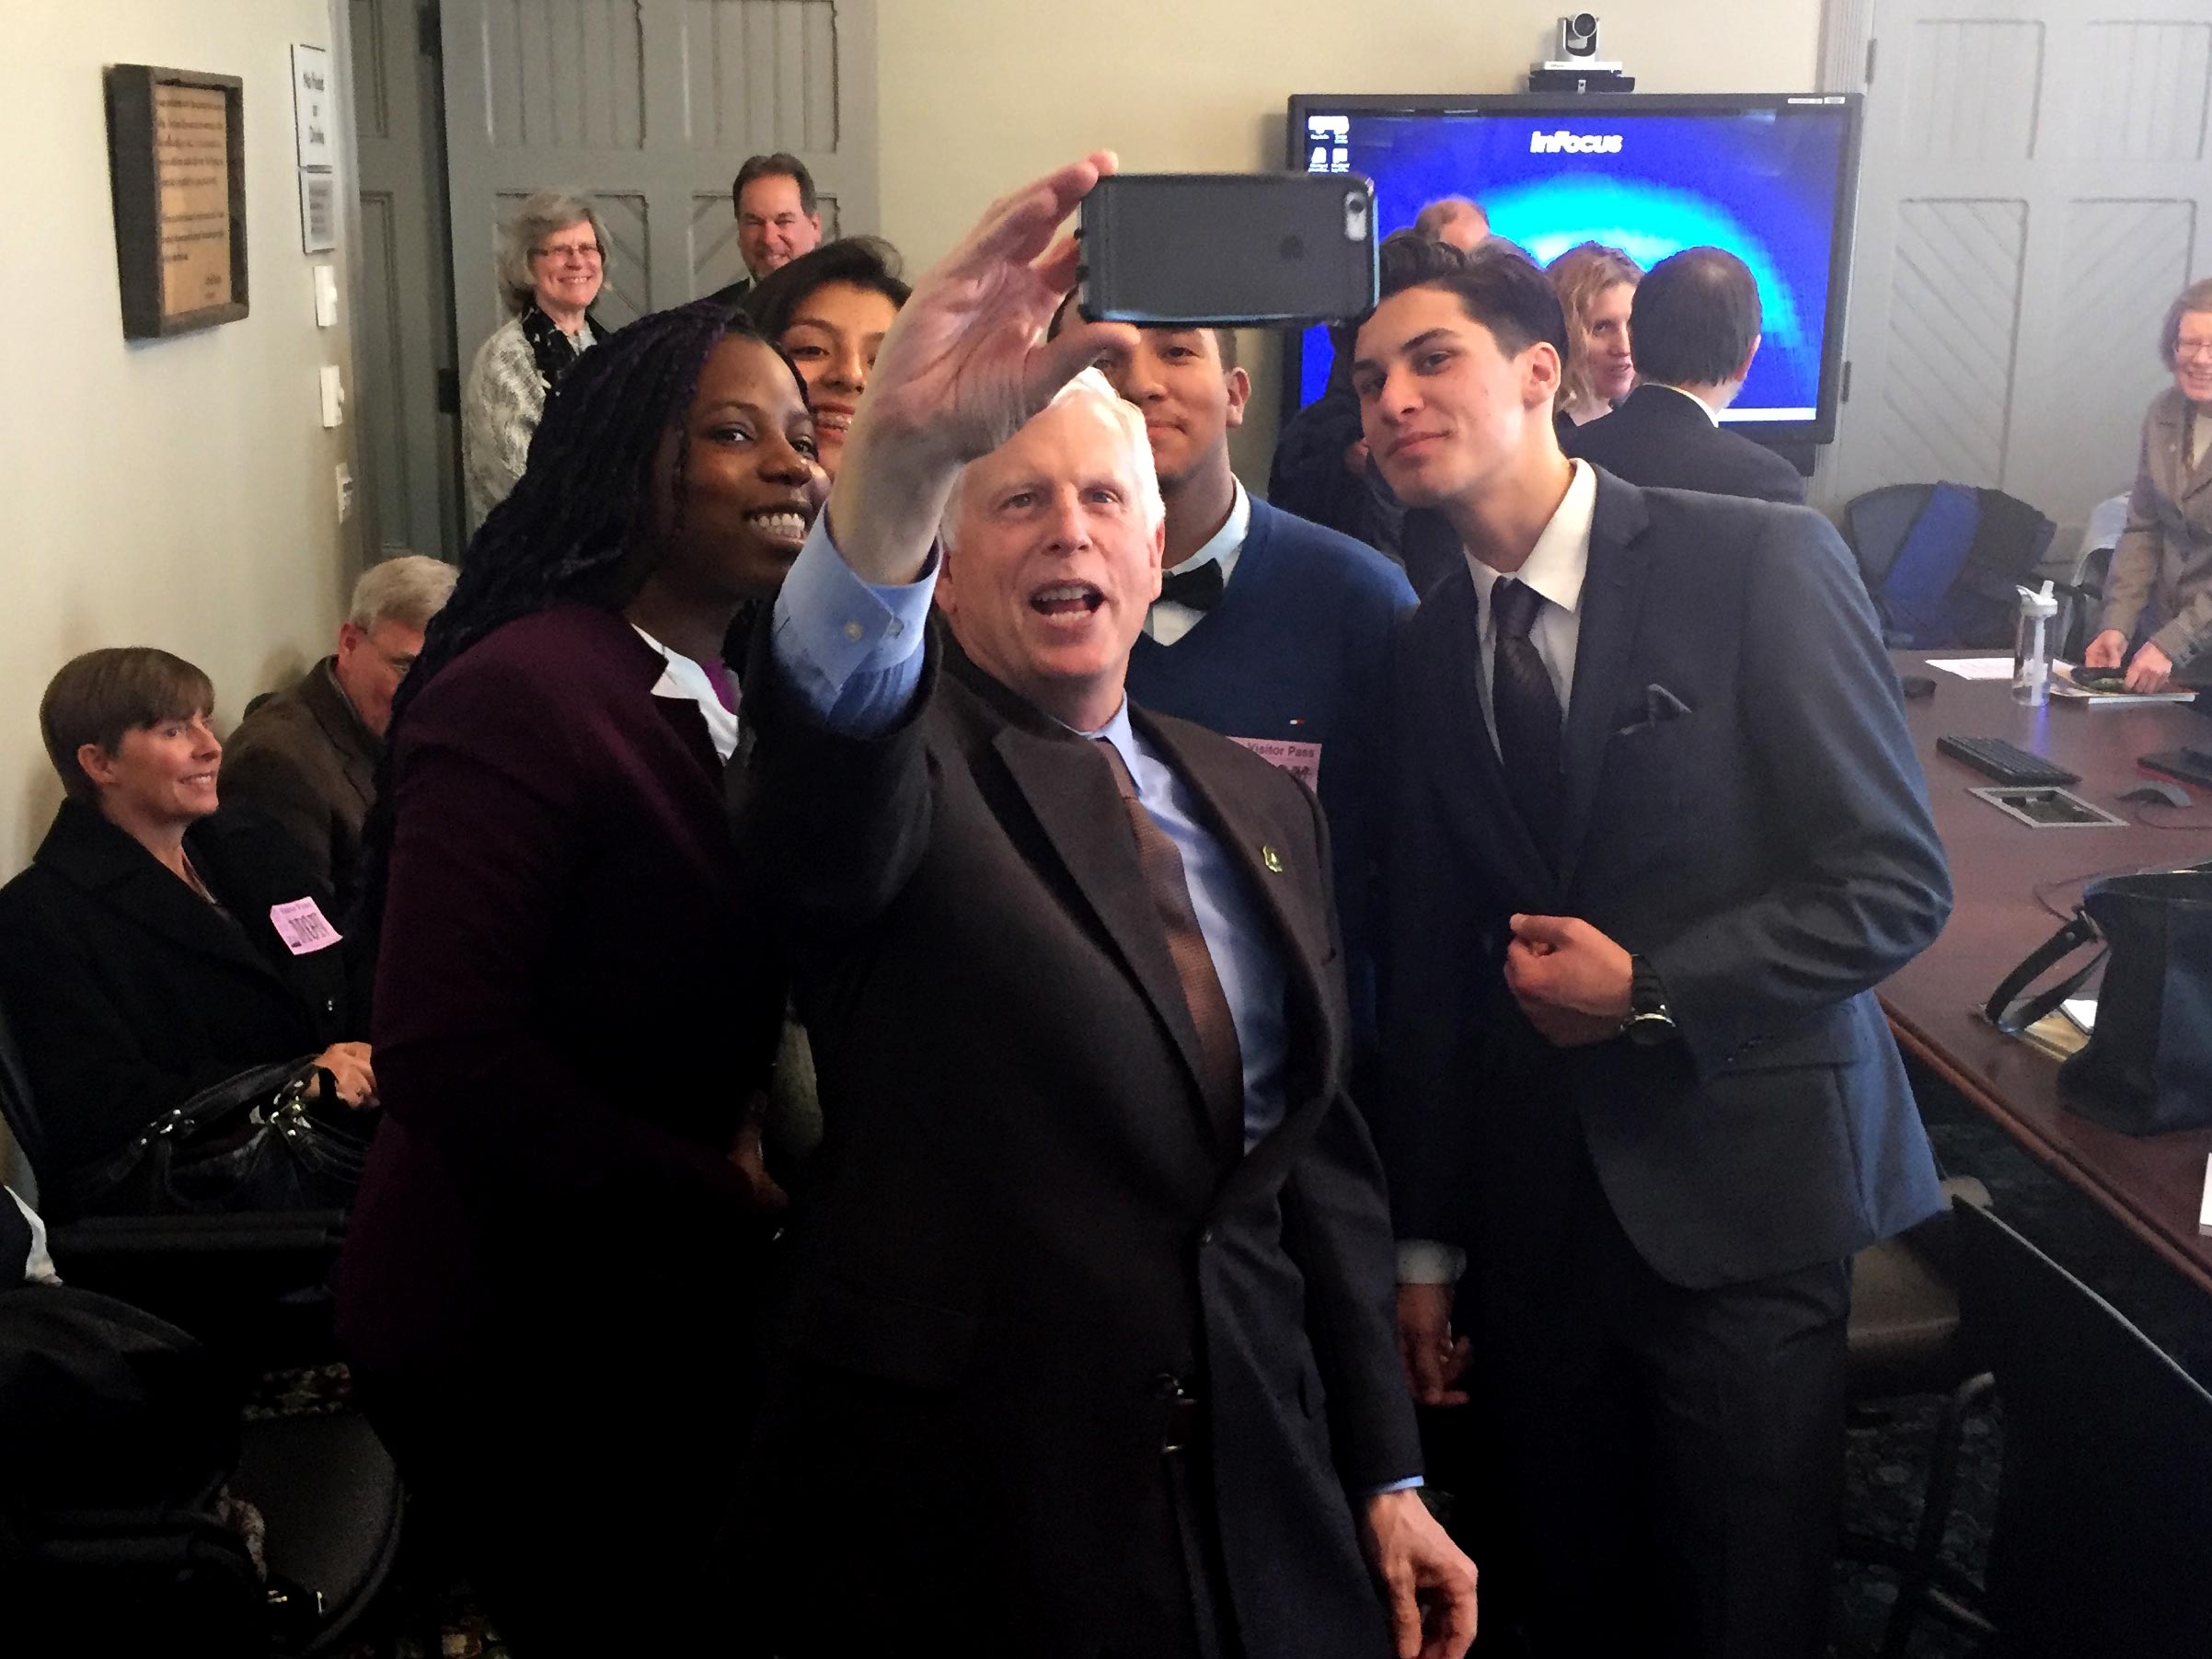 Chief Tidwell, leader of the U.S. Forest Service, takes a selfie with the group after hearing them speak about how important the PCT is to them.